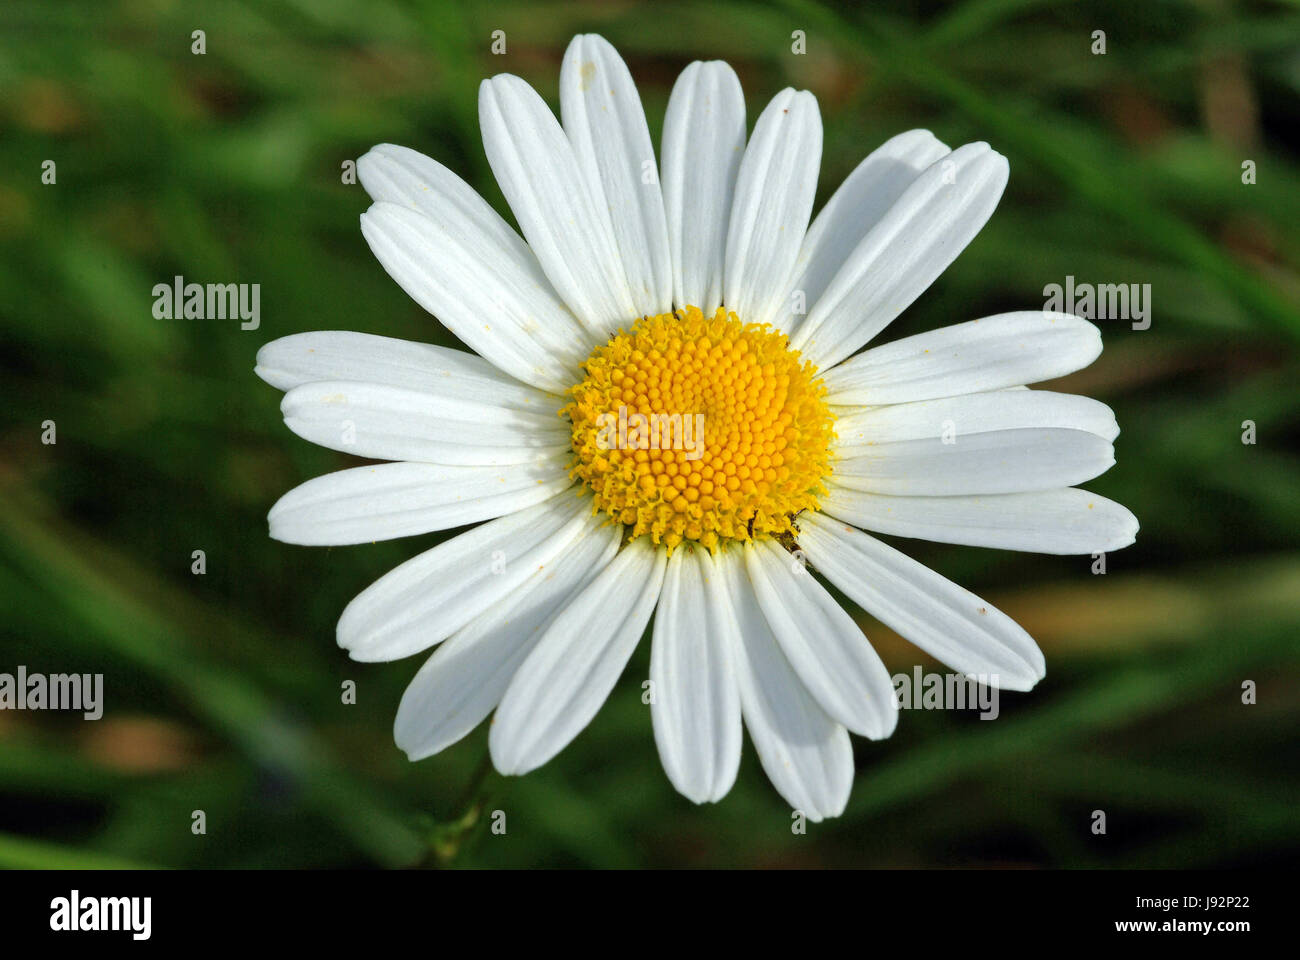 macro, close-up, macro admission, close up view, garden, flower, plant, field, Stock Photo